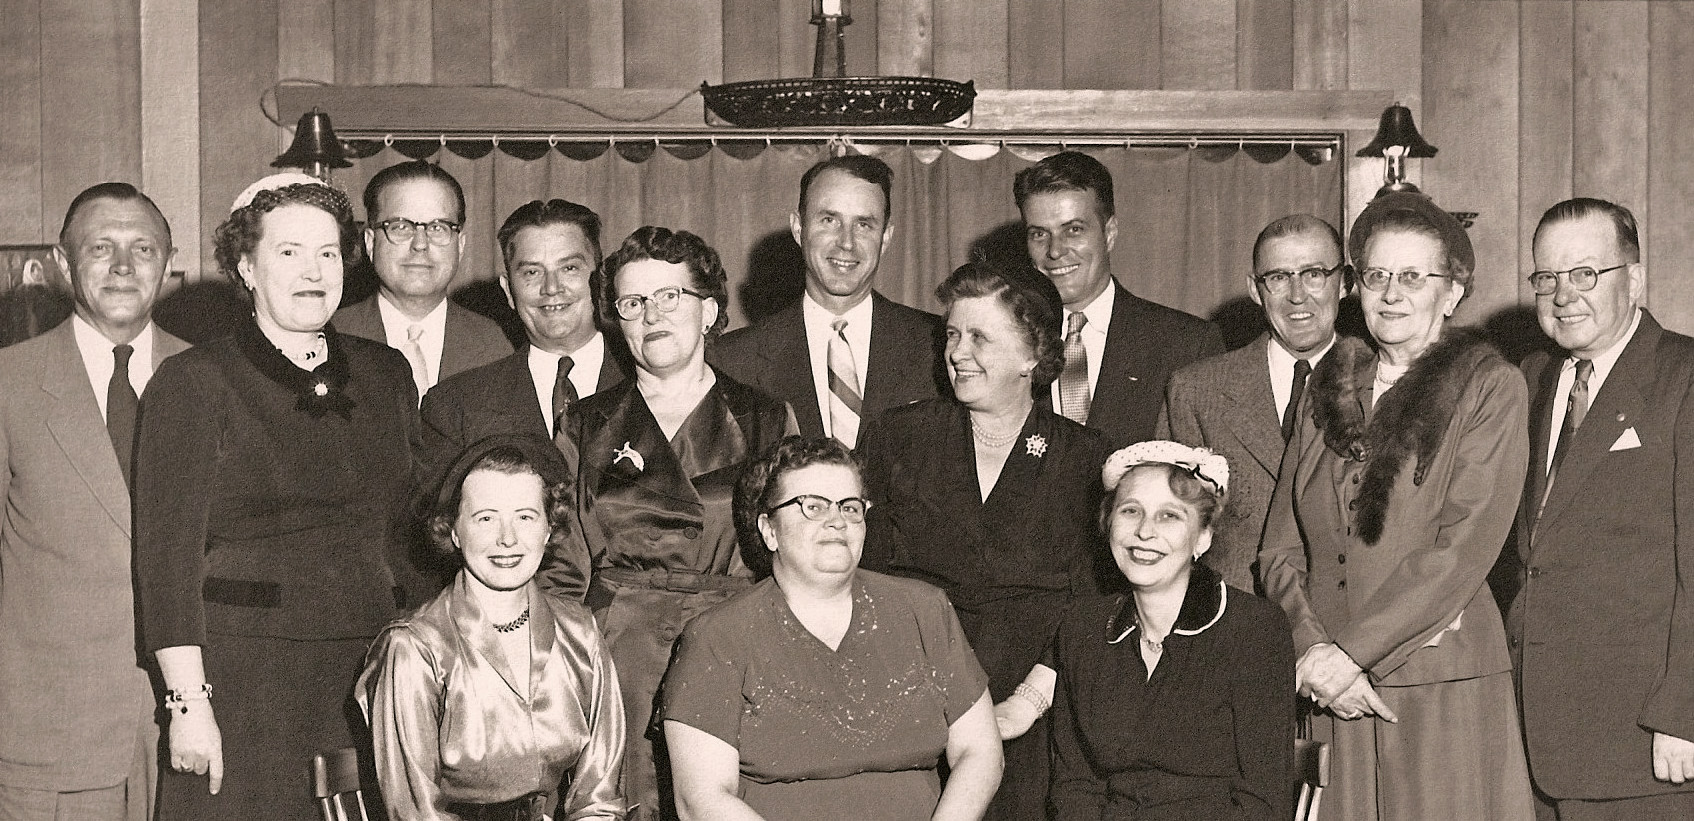 Kelley family reunion taken either in Elgin or Rockford, Illinois around 1952. My Dad, Donald A., is fourth from the right, standing; Mom, "Dovey", is far right seated. Both gone, both still loved deeply. View full size.